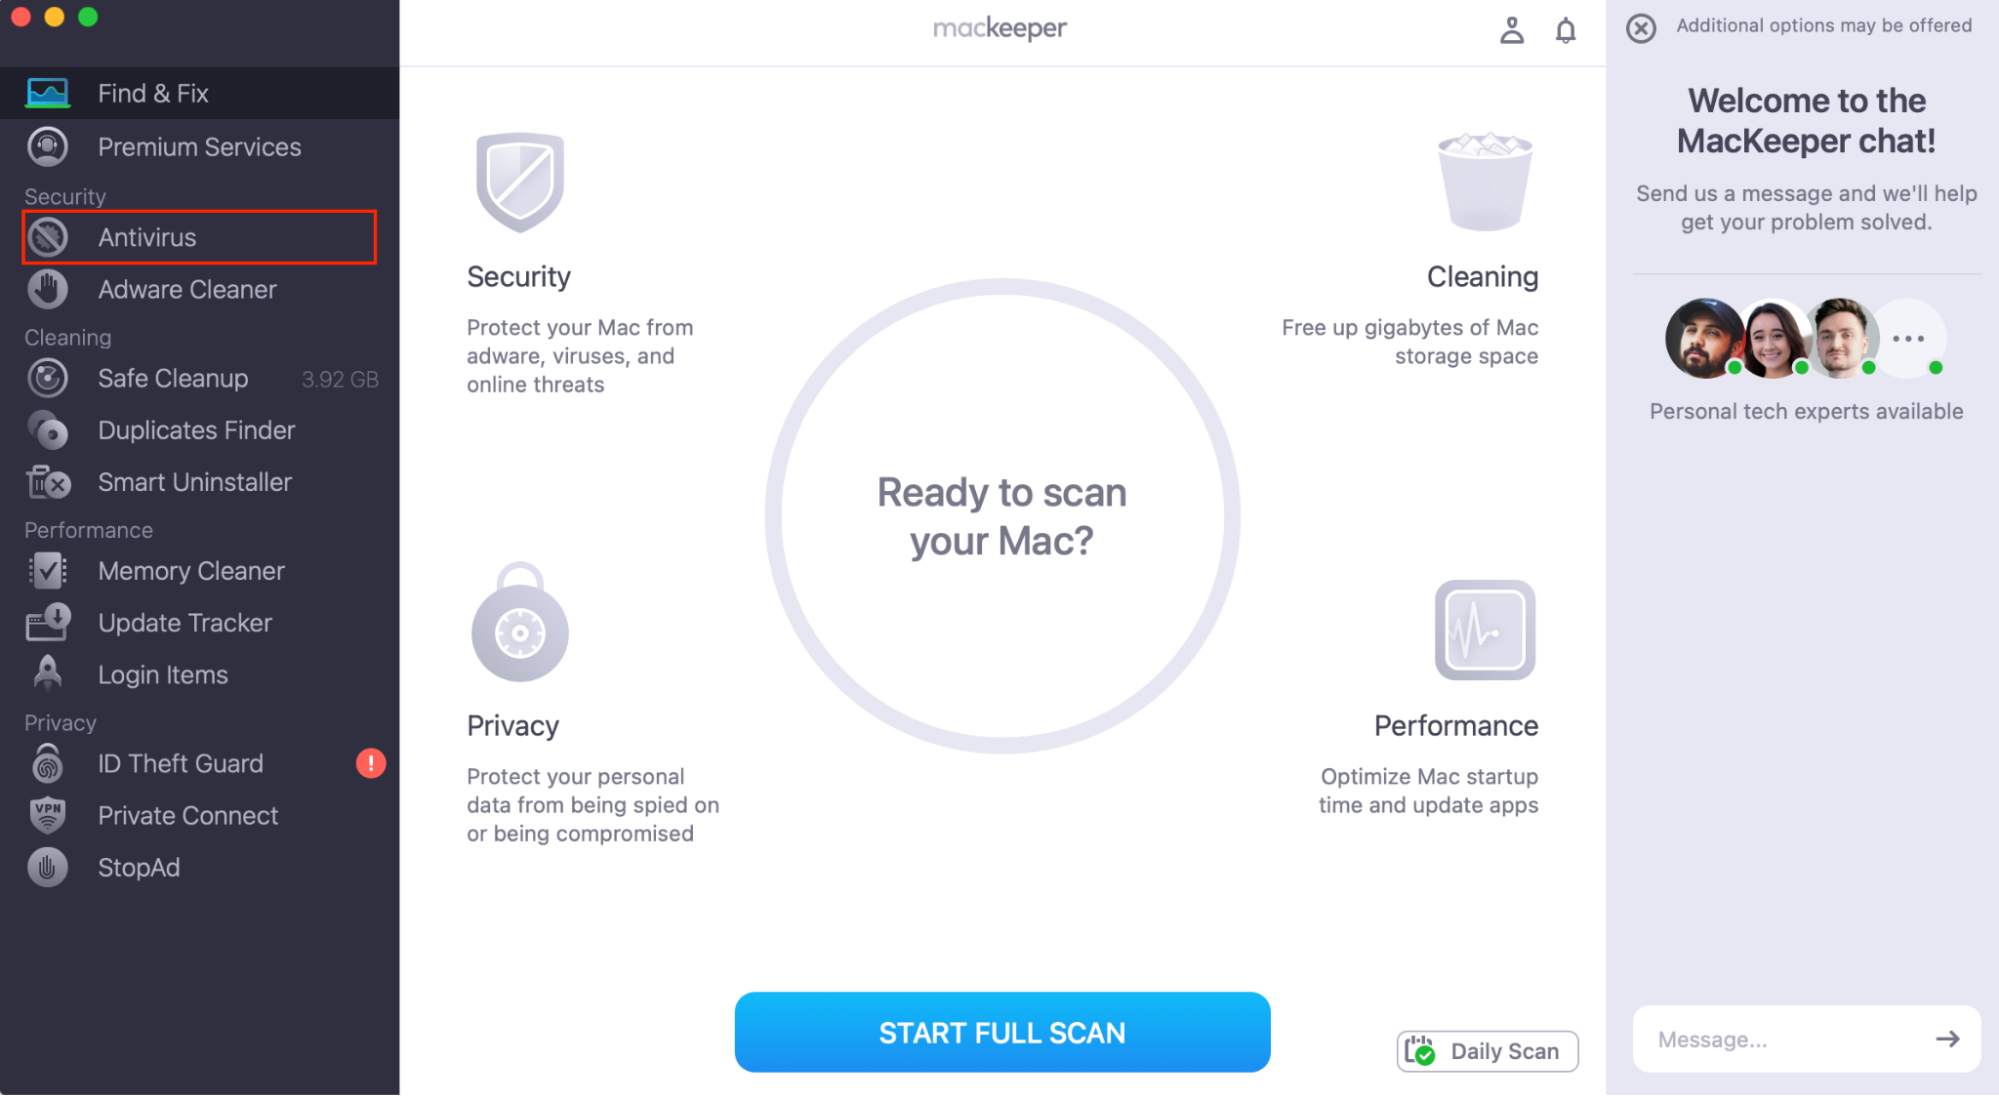 MacKeeper’s Find & Fix home screen, with Antivirus highlighted in the sidebar. Part of a guide on what to do if your Mac has been attacked by ransomware.